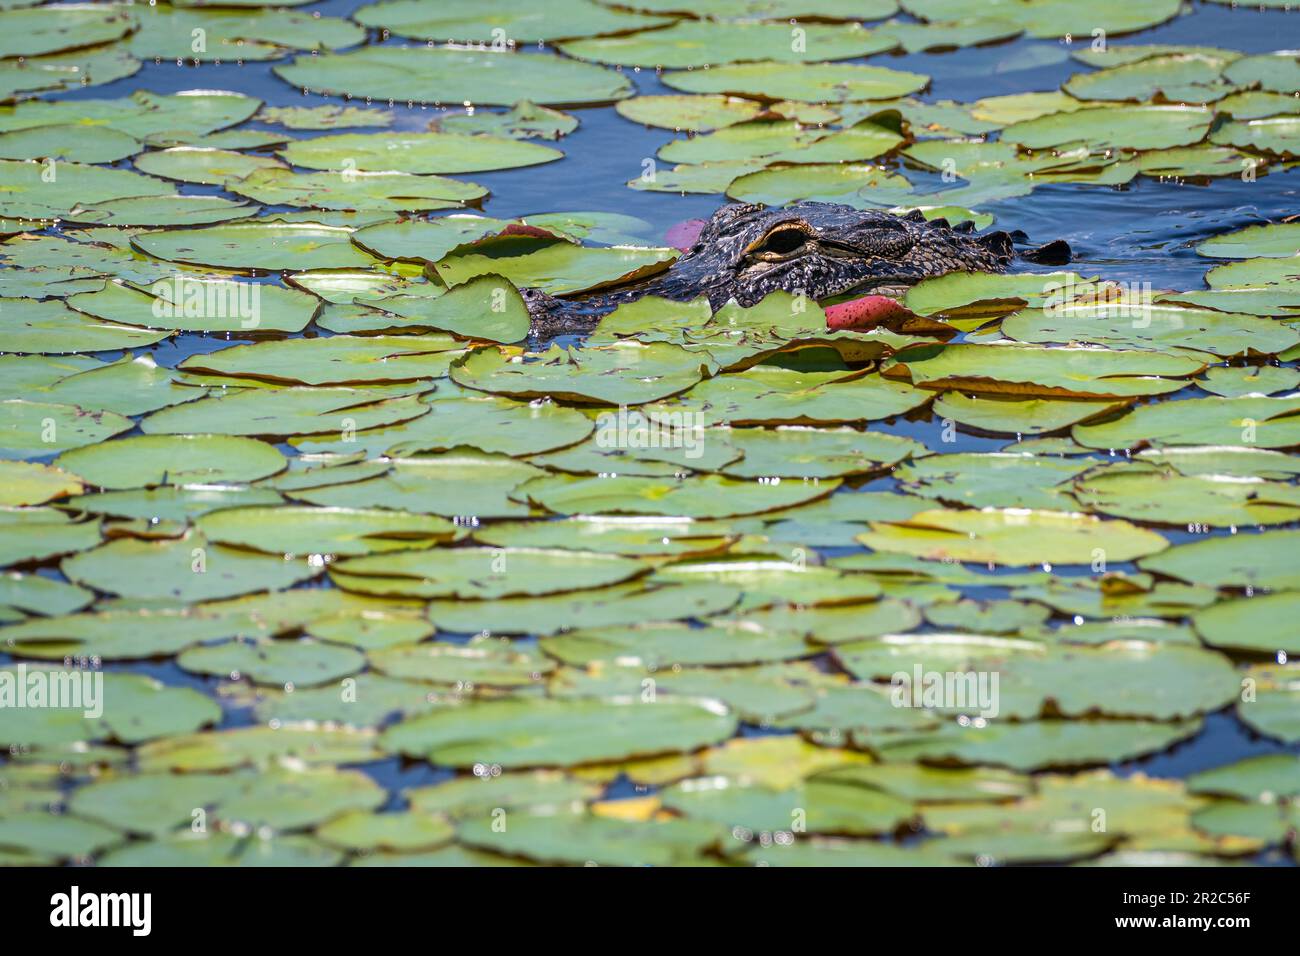 Alligator peering through lily pads in Lake Apopka along the Healthy West Orange Boardwalk trail at the Oakland Nature Preserve in Oakland, Florida. Stock Photo